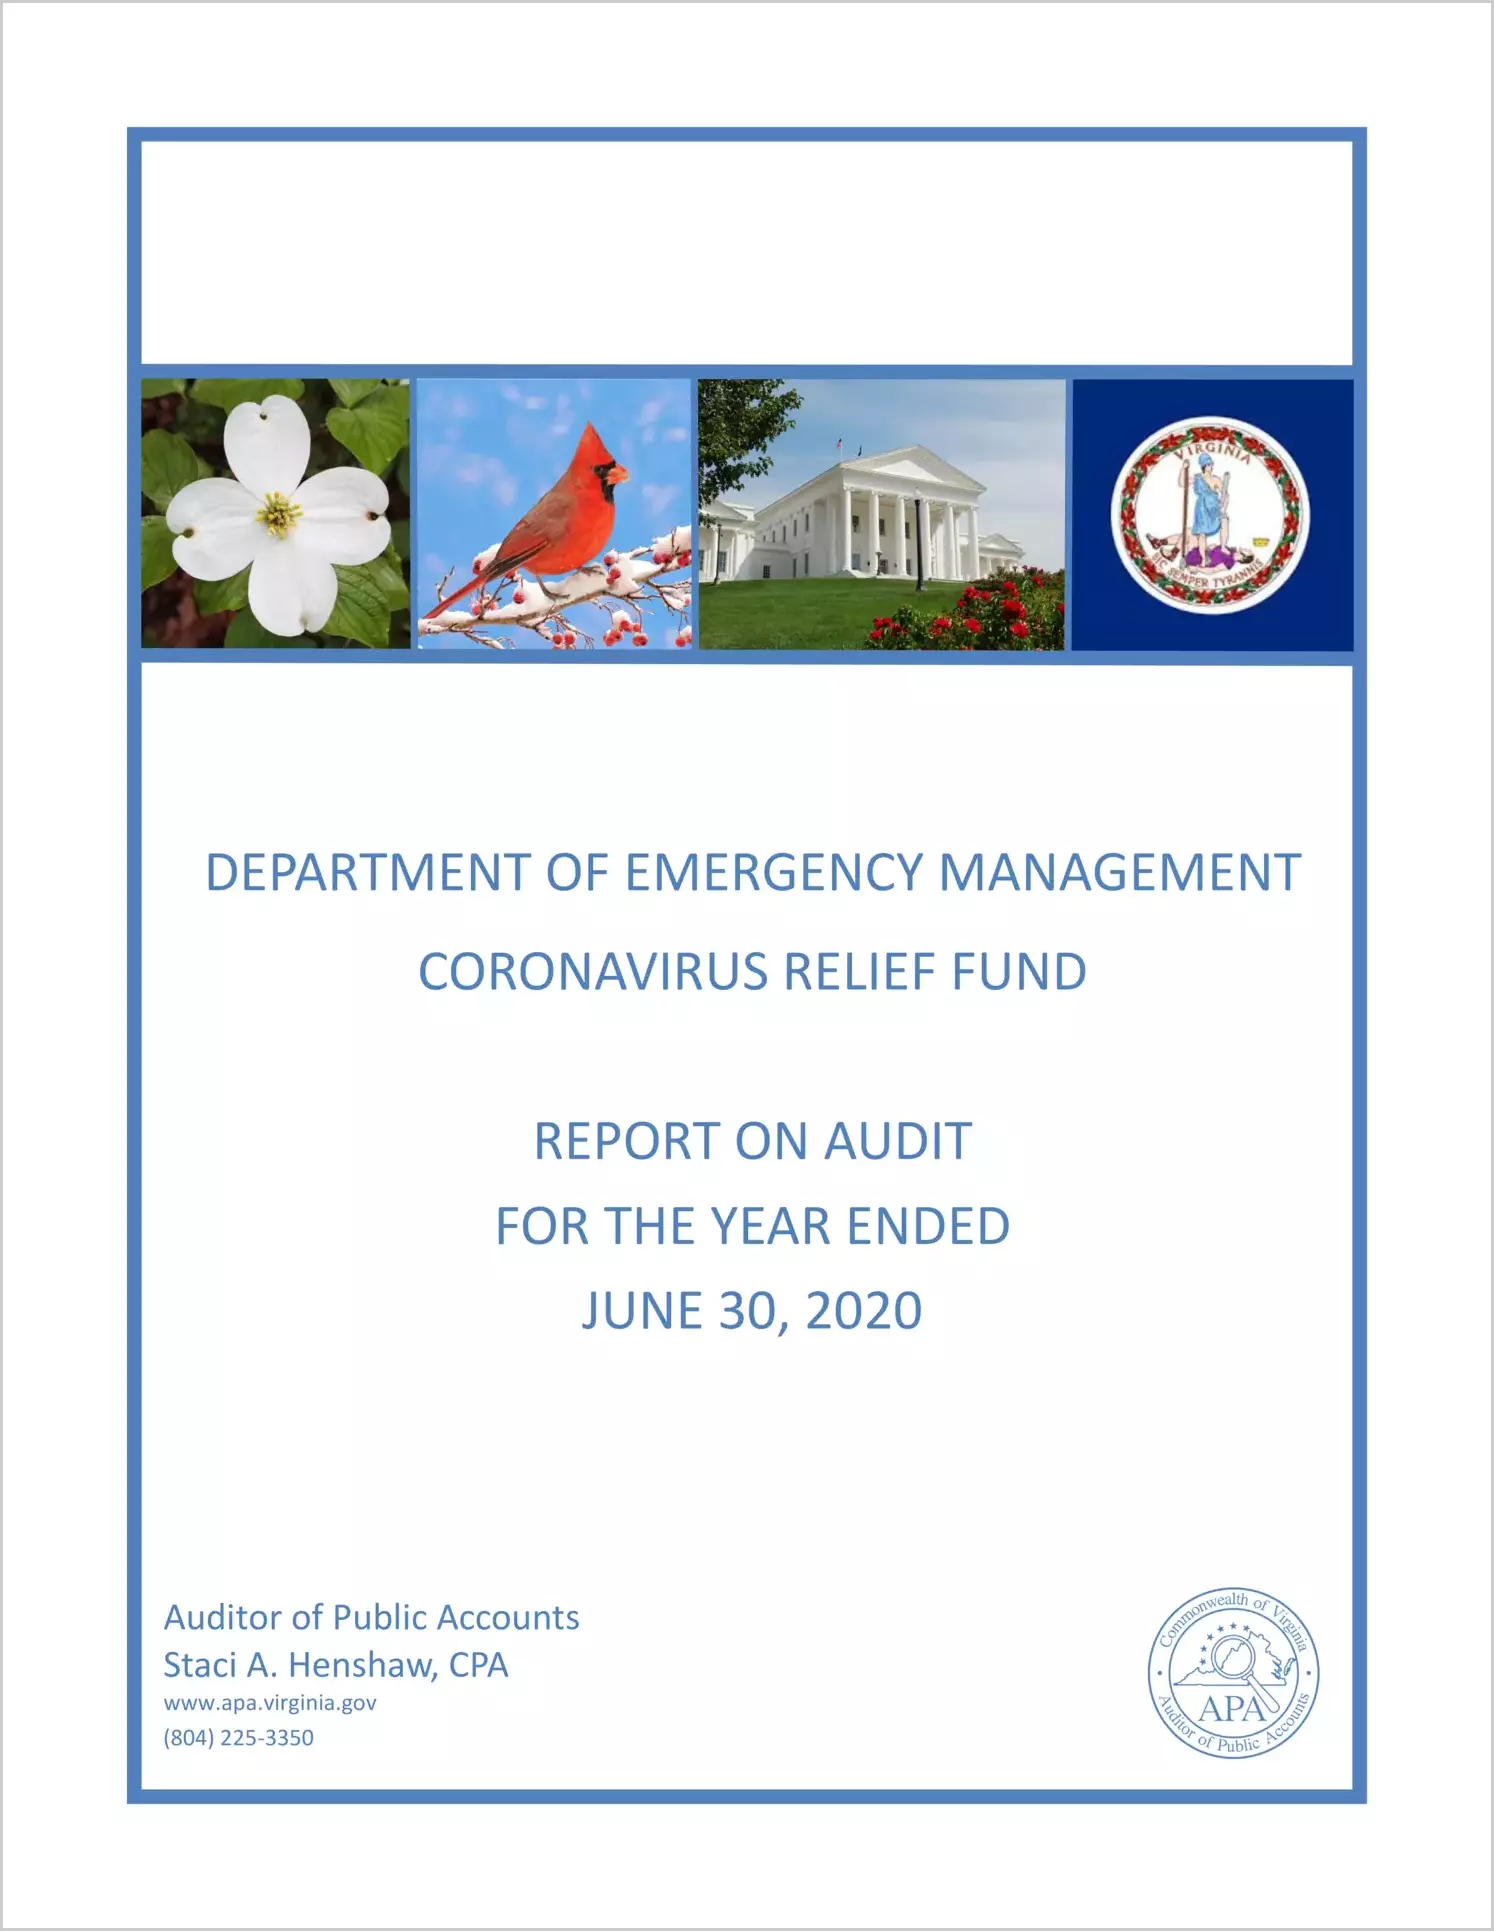 Department of Emergency Management Coronavirus Relief Fund for the year ended June 30, 2020